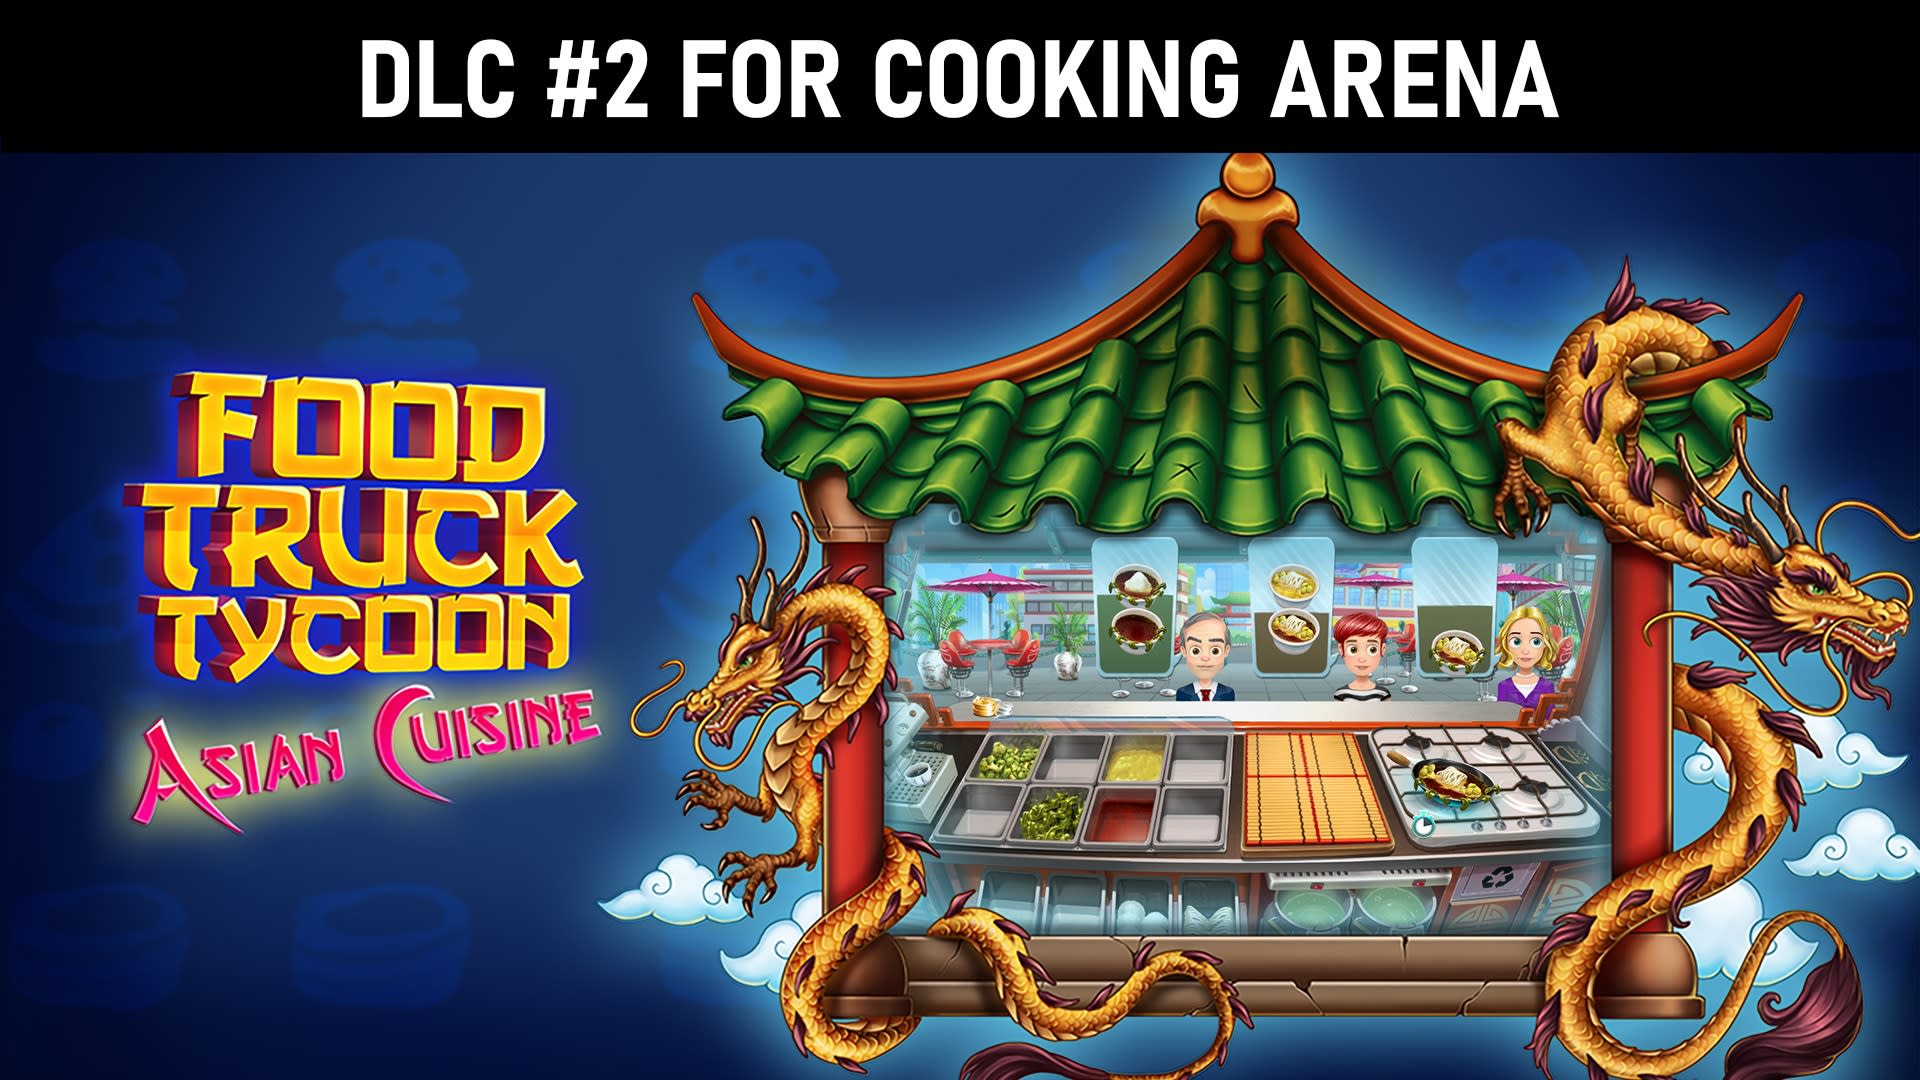 Cooking Arena: Food Truck Tycoon Asian Cuisine (DLC#2) 1